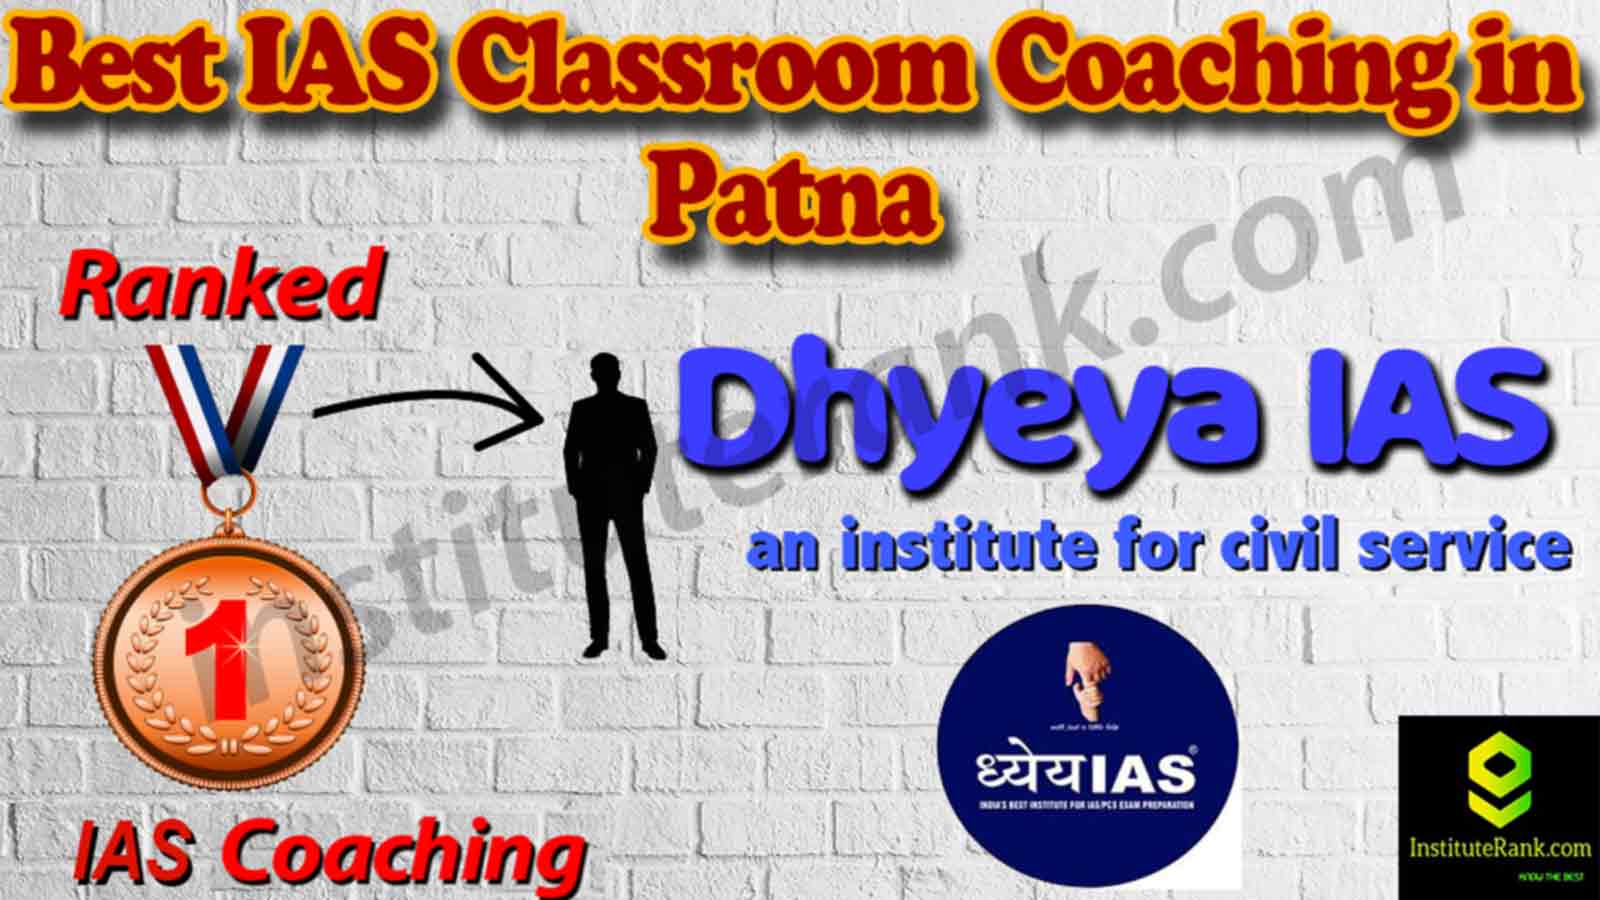 Best IAS Coaching and fees in Patna